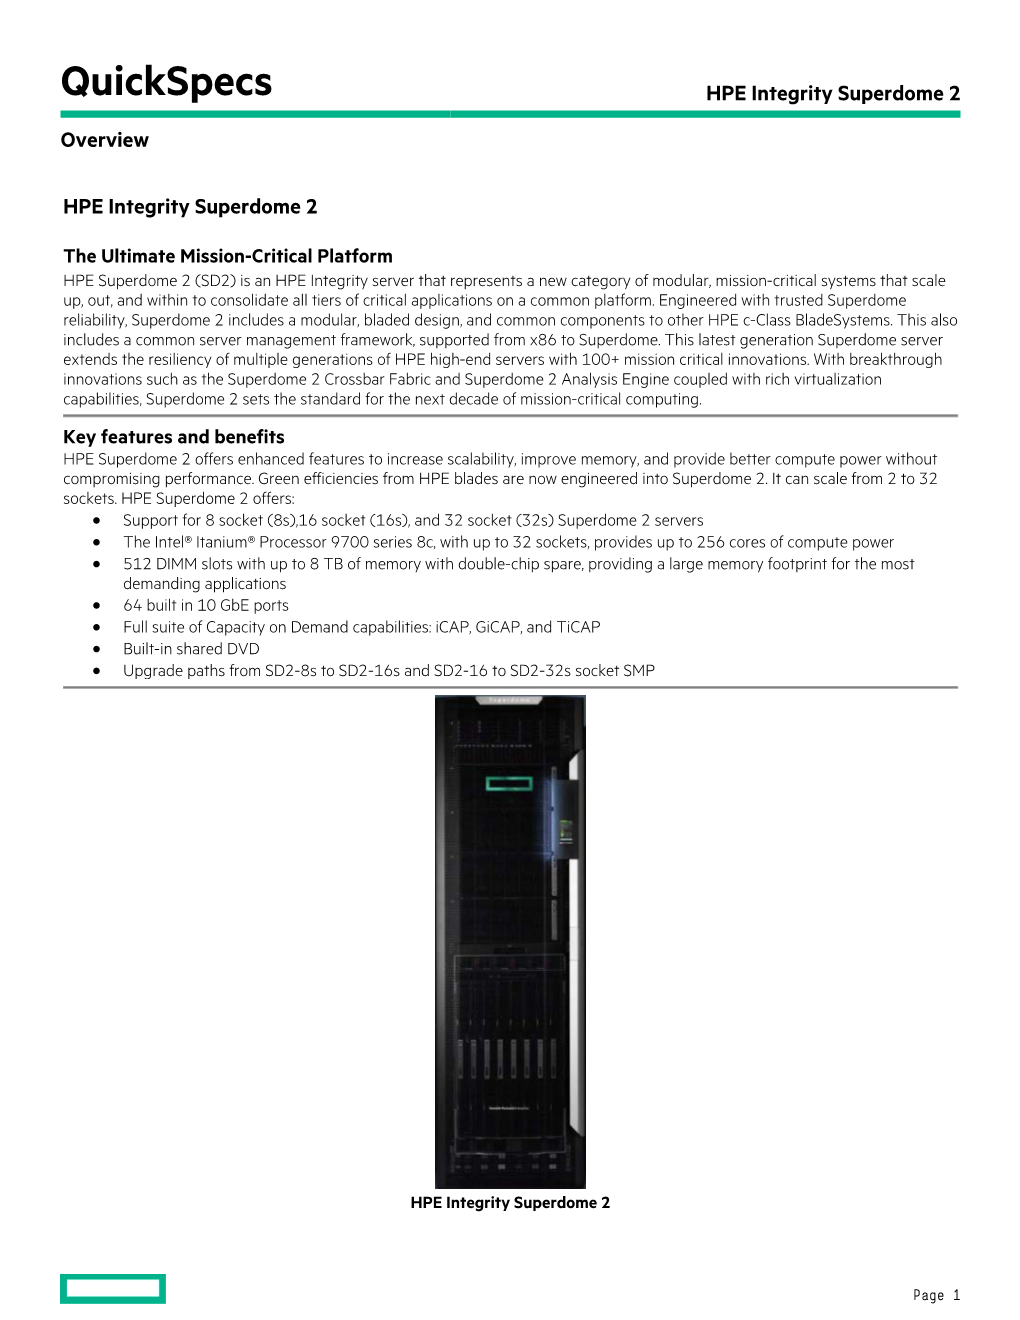 HPE Integrity Superdome 2 Overview